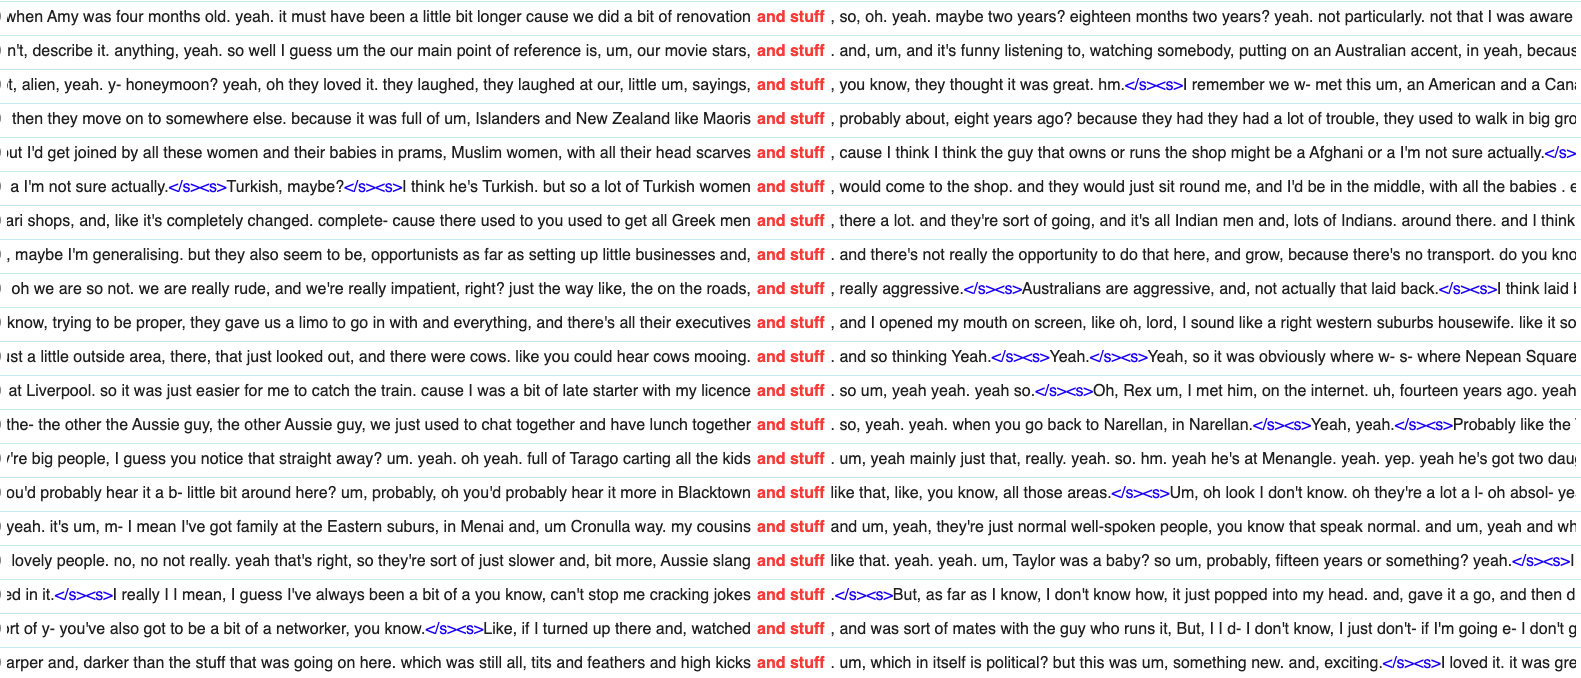 A screenshot of the results of a concordance search for *and stuff* in the Sydney Speaks dataset. The screenshot shows multiple lines of text with the words *and stuff* centred in every line and formatted red and bold.